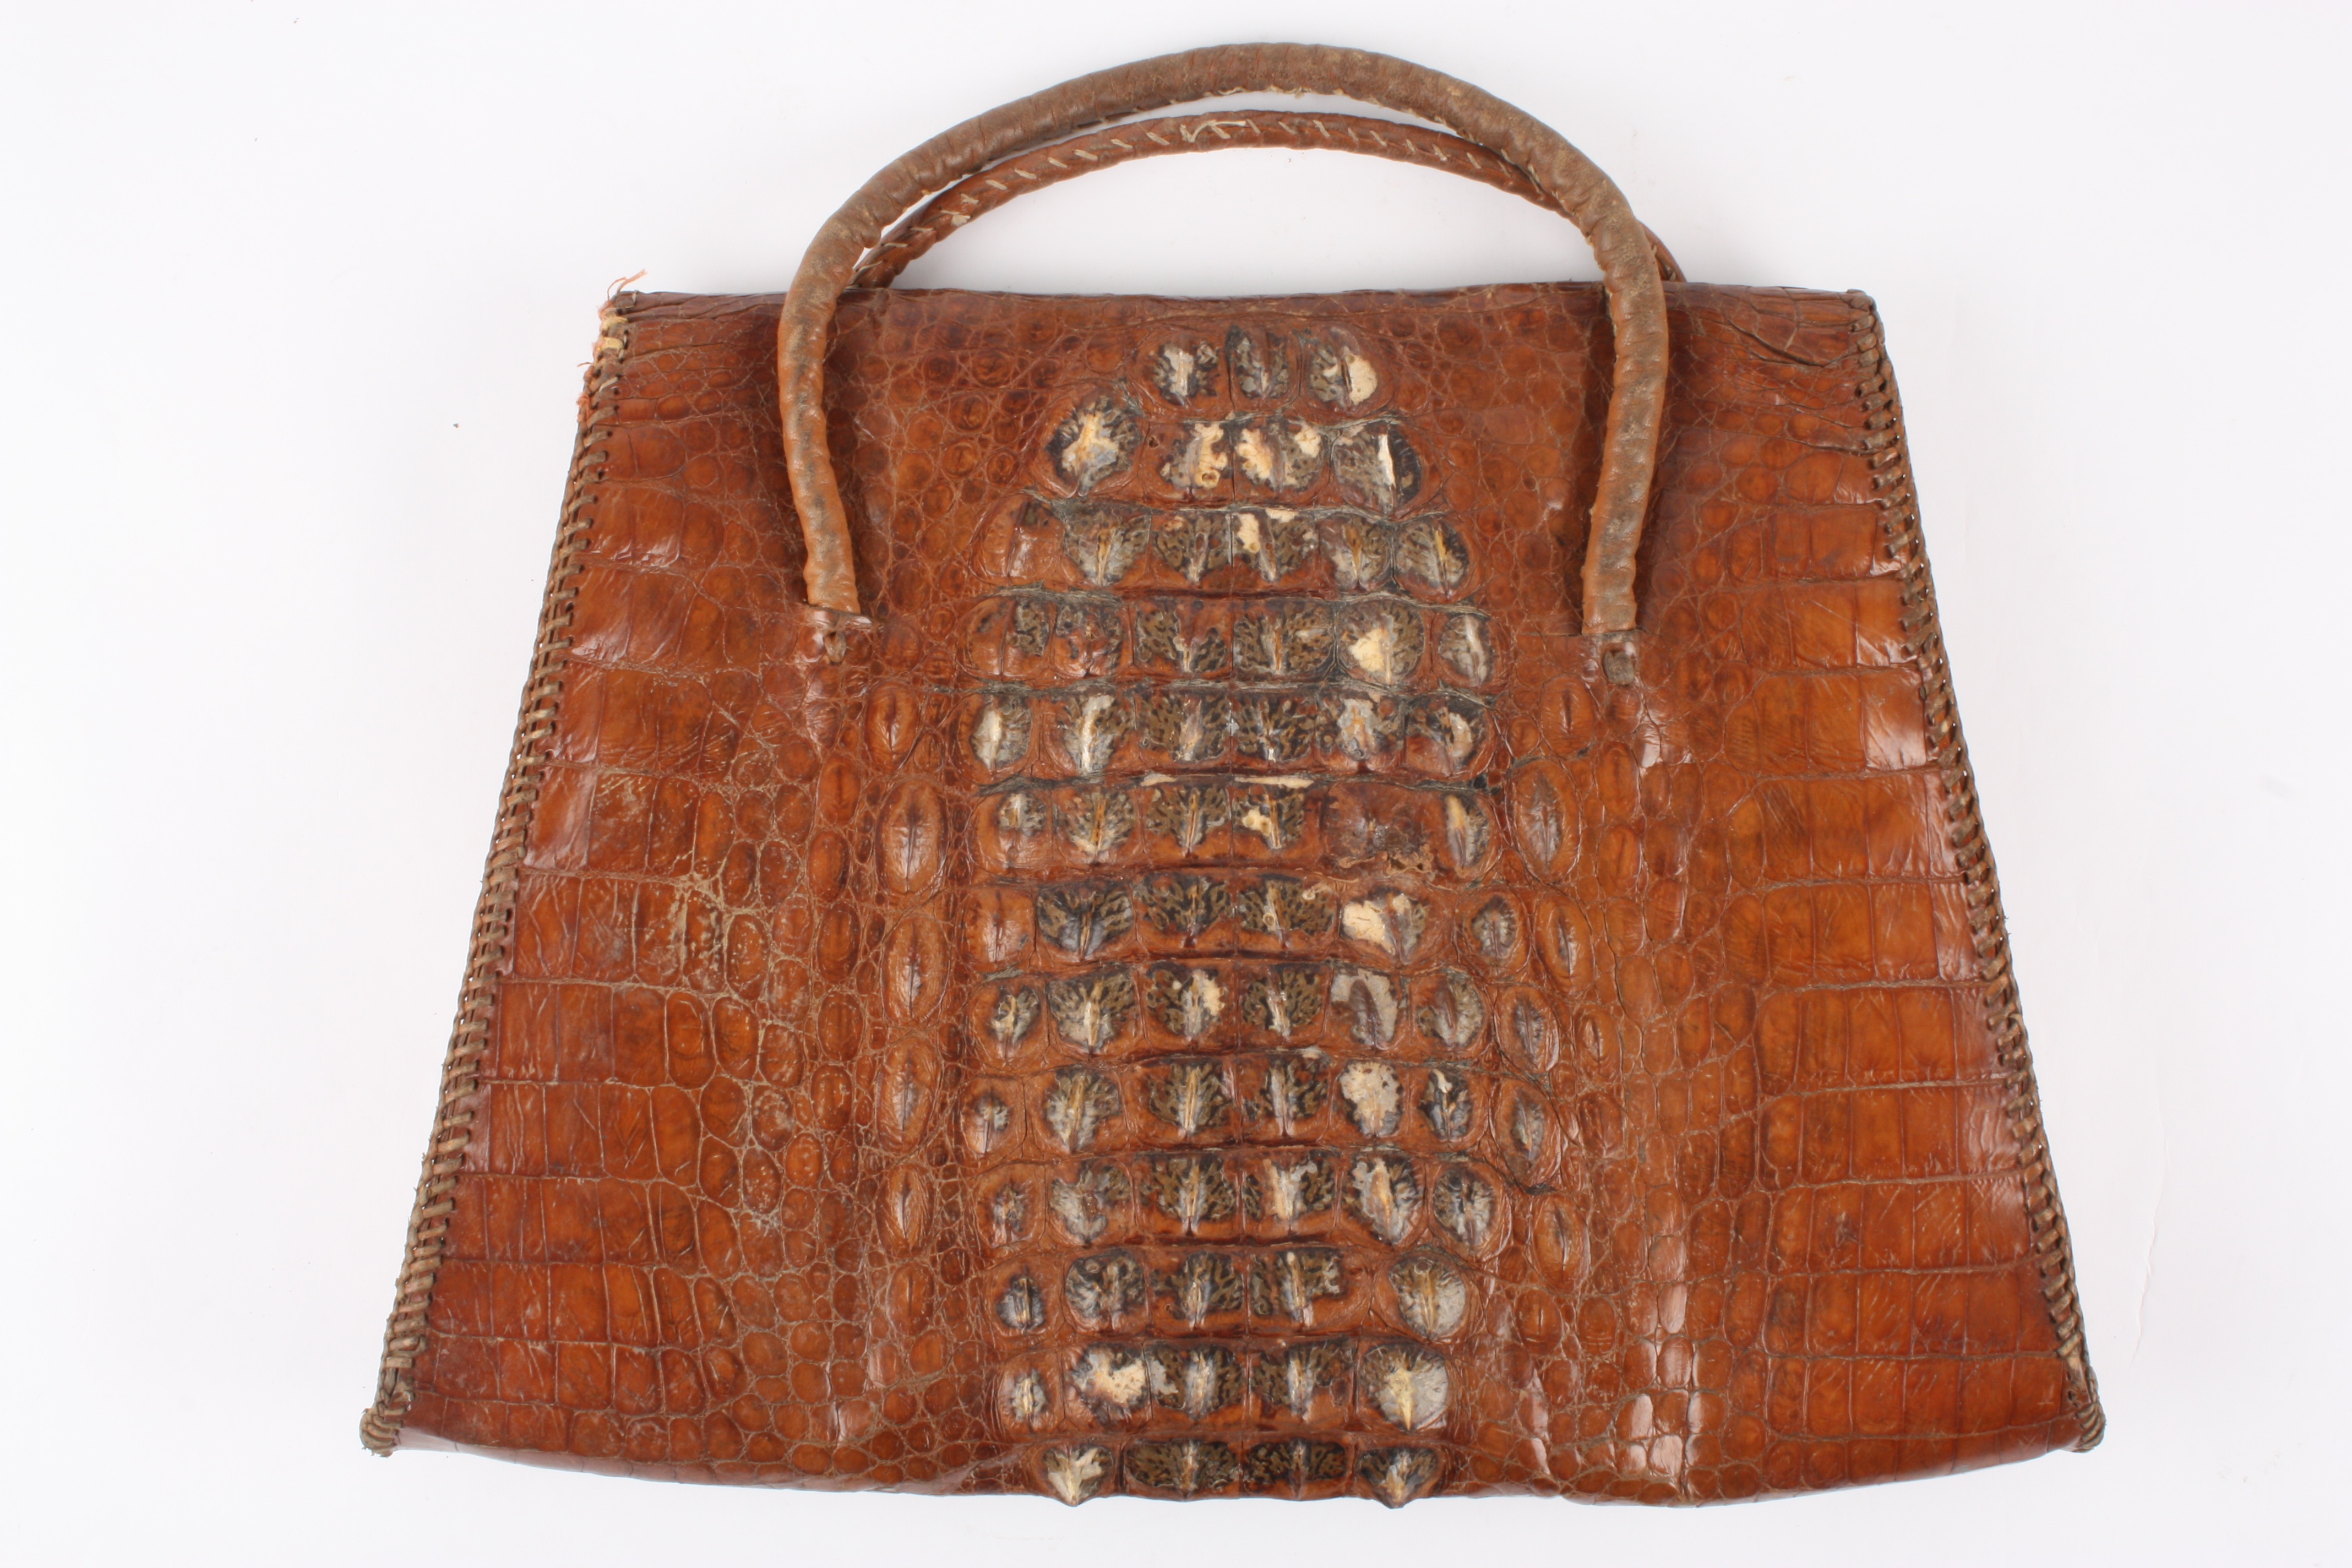 Brown alligator/crocodile skin bag.
With two sections inside.Dimensions: Condition reportFair - Image 2 of 3